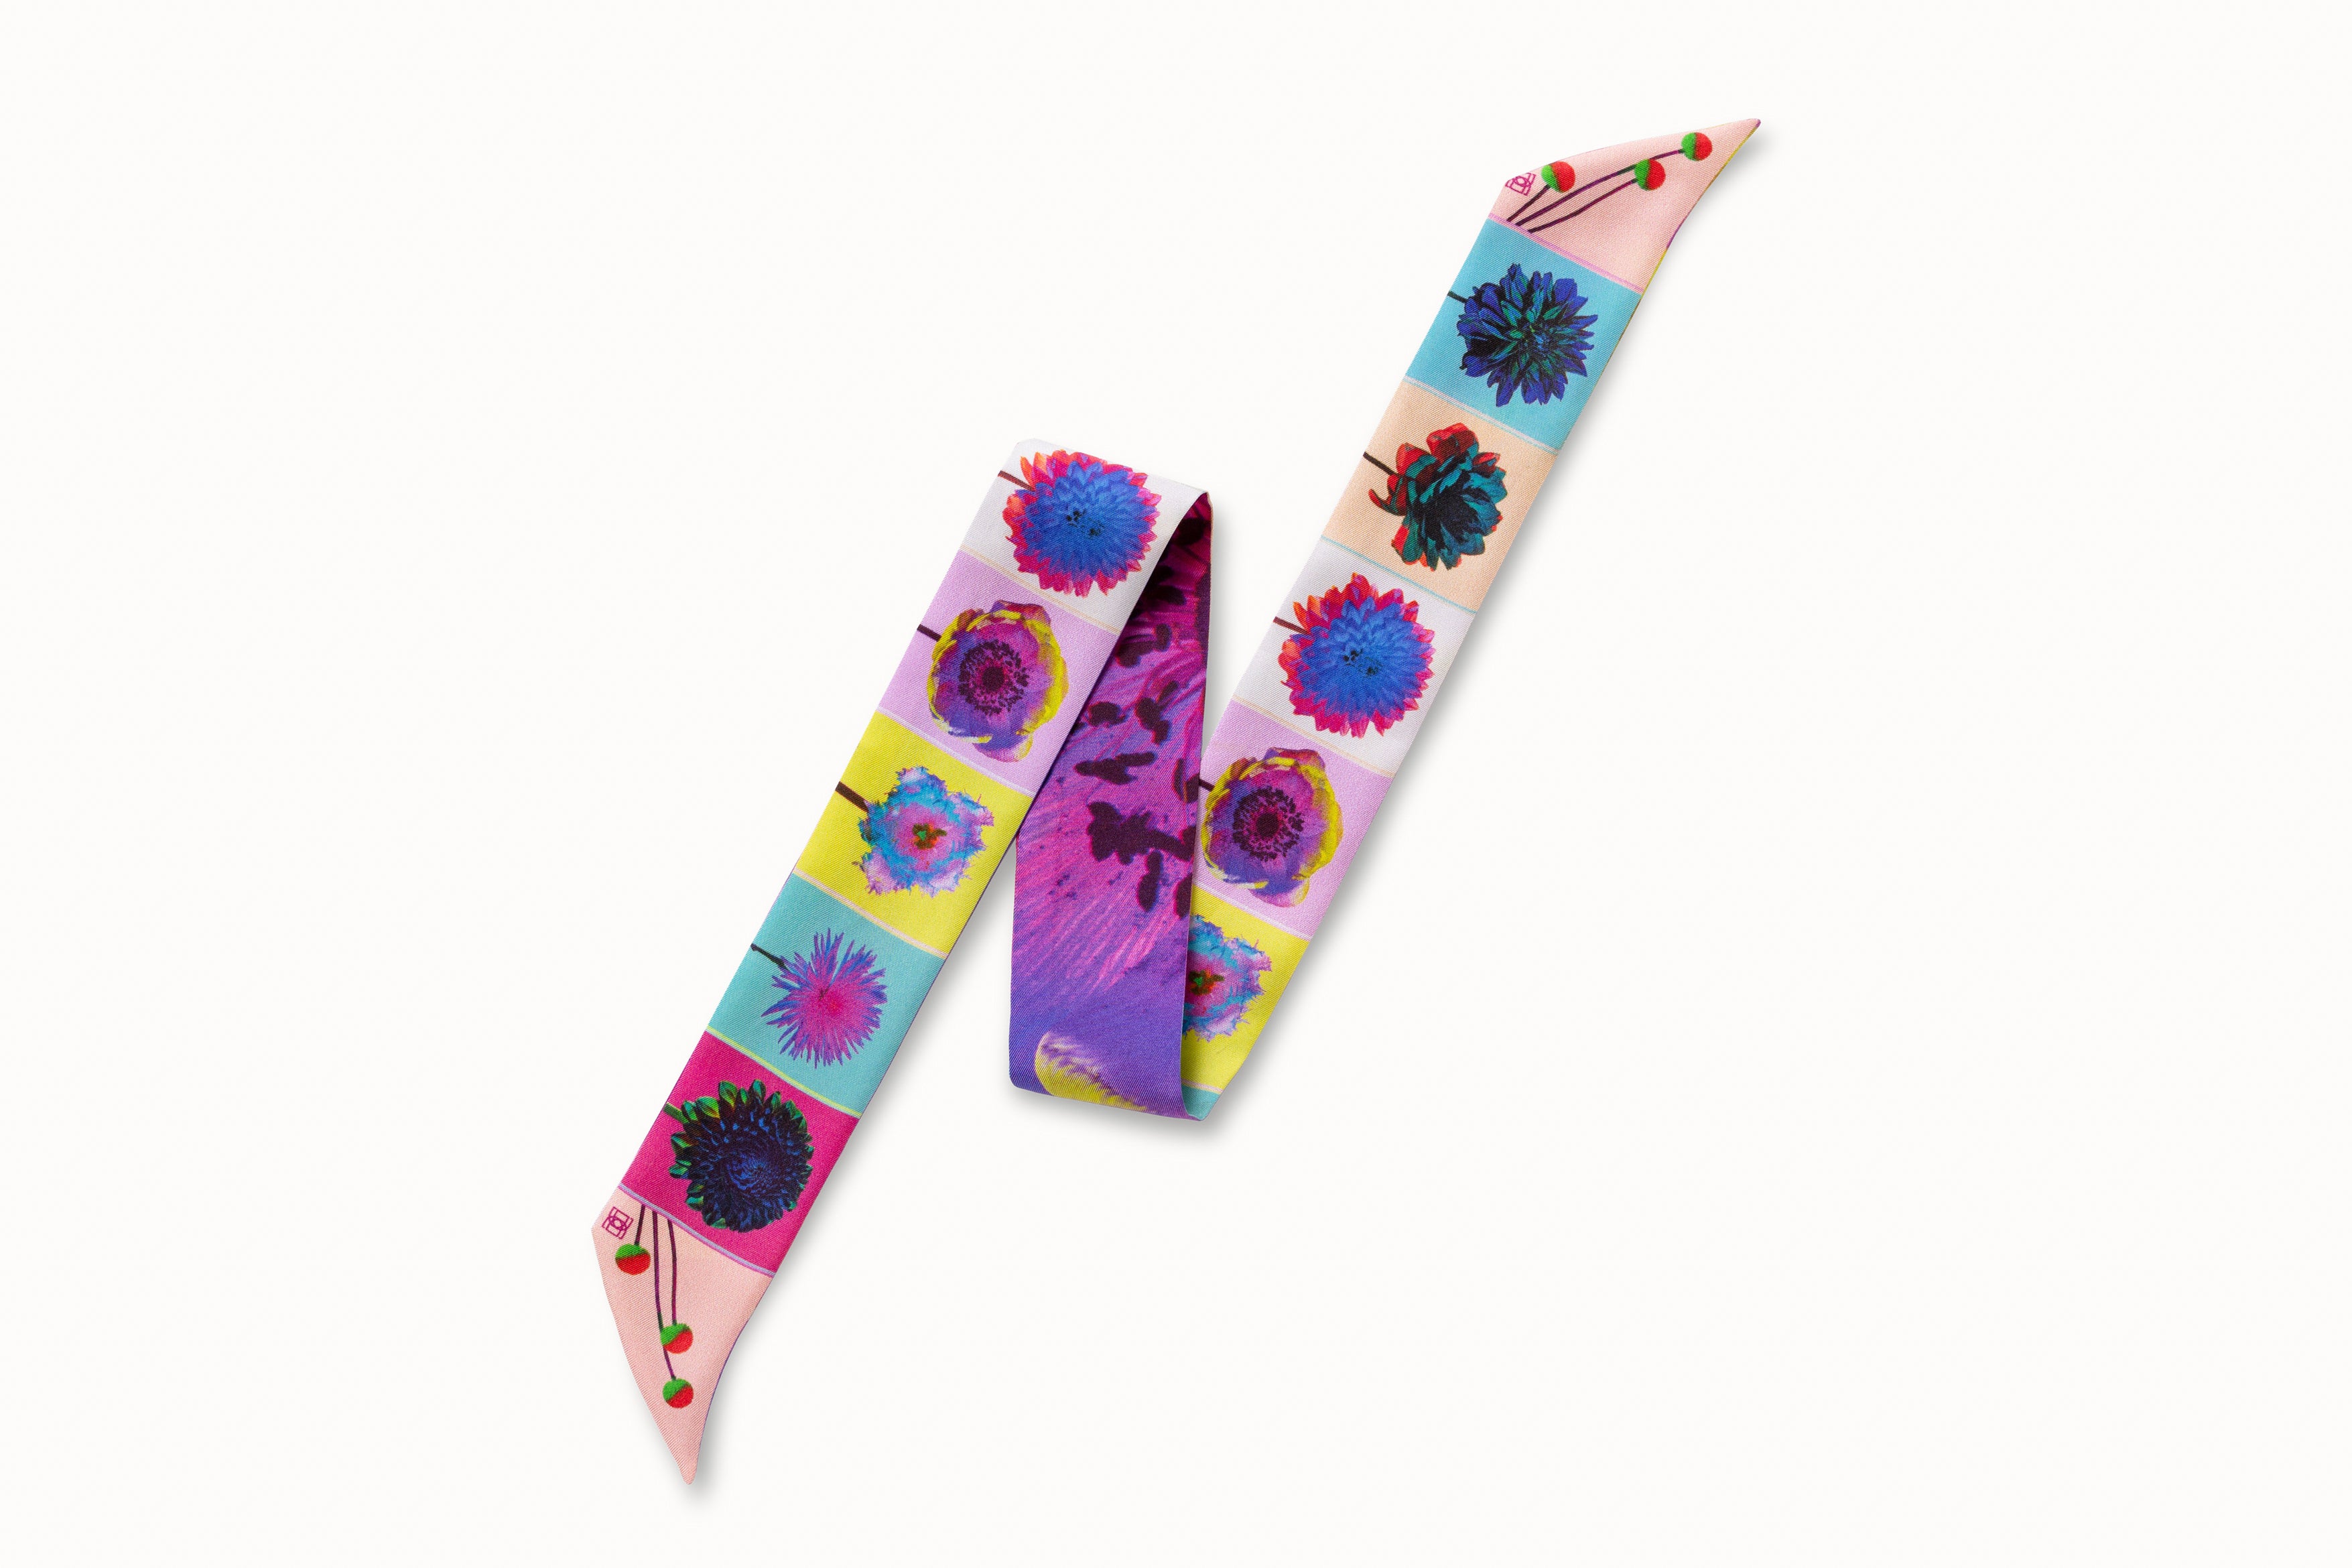 Flatlay image of 100% silk ribbon style scarf, 2” wide by 32” long, folded into a zig zag shape so both sides of the scarf are seen. Design features a series of brightly colored flowers in shades of pink, blue, green and yellow and an abstract close-up of a purple and yellow flower petal on the other.